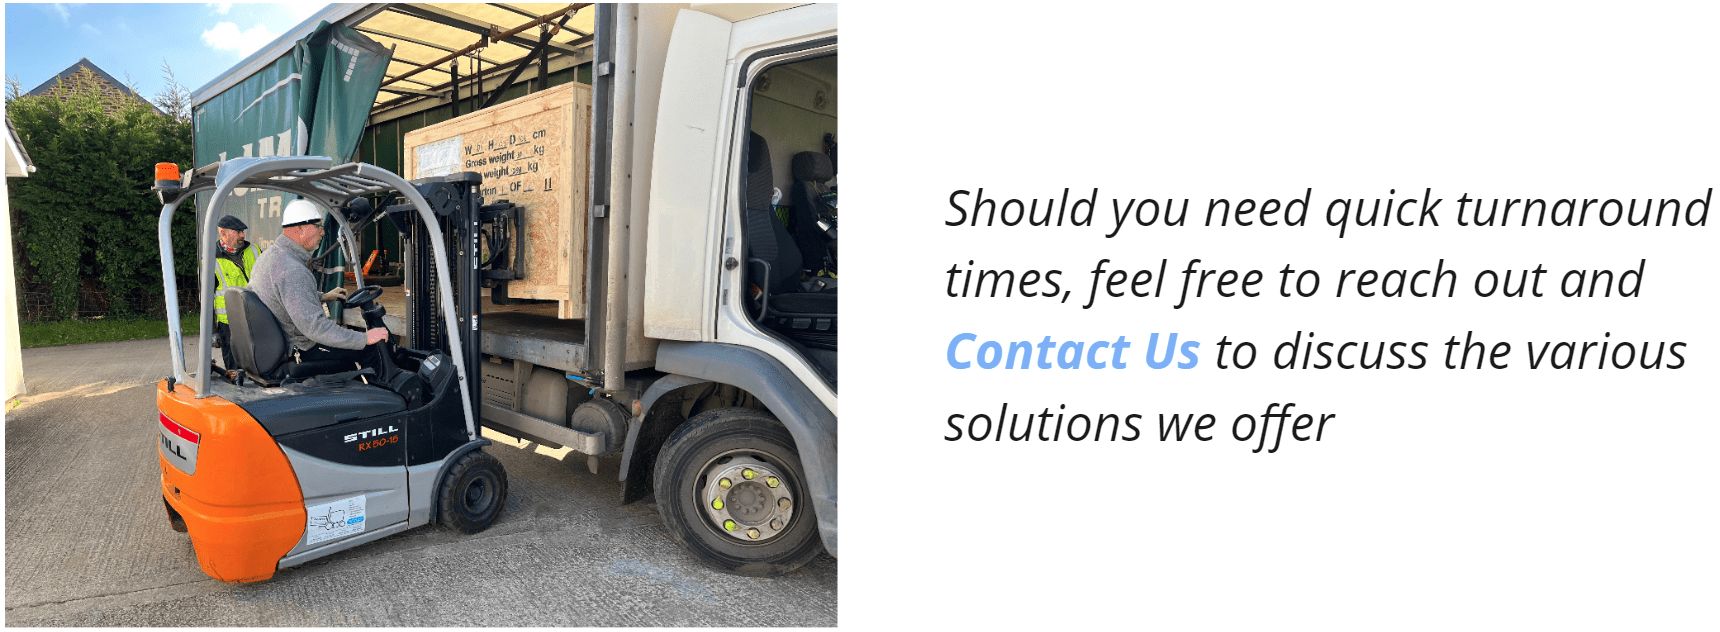 Should you need quick turnaround times, feel free to reach out and Contact Us to discuss the various solutions we offer